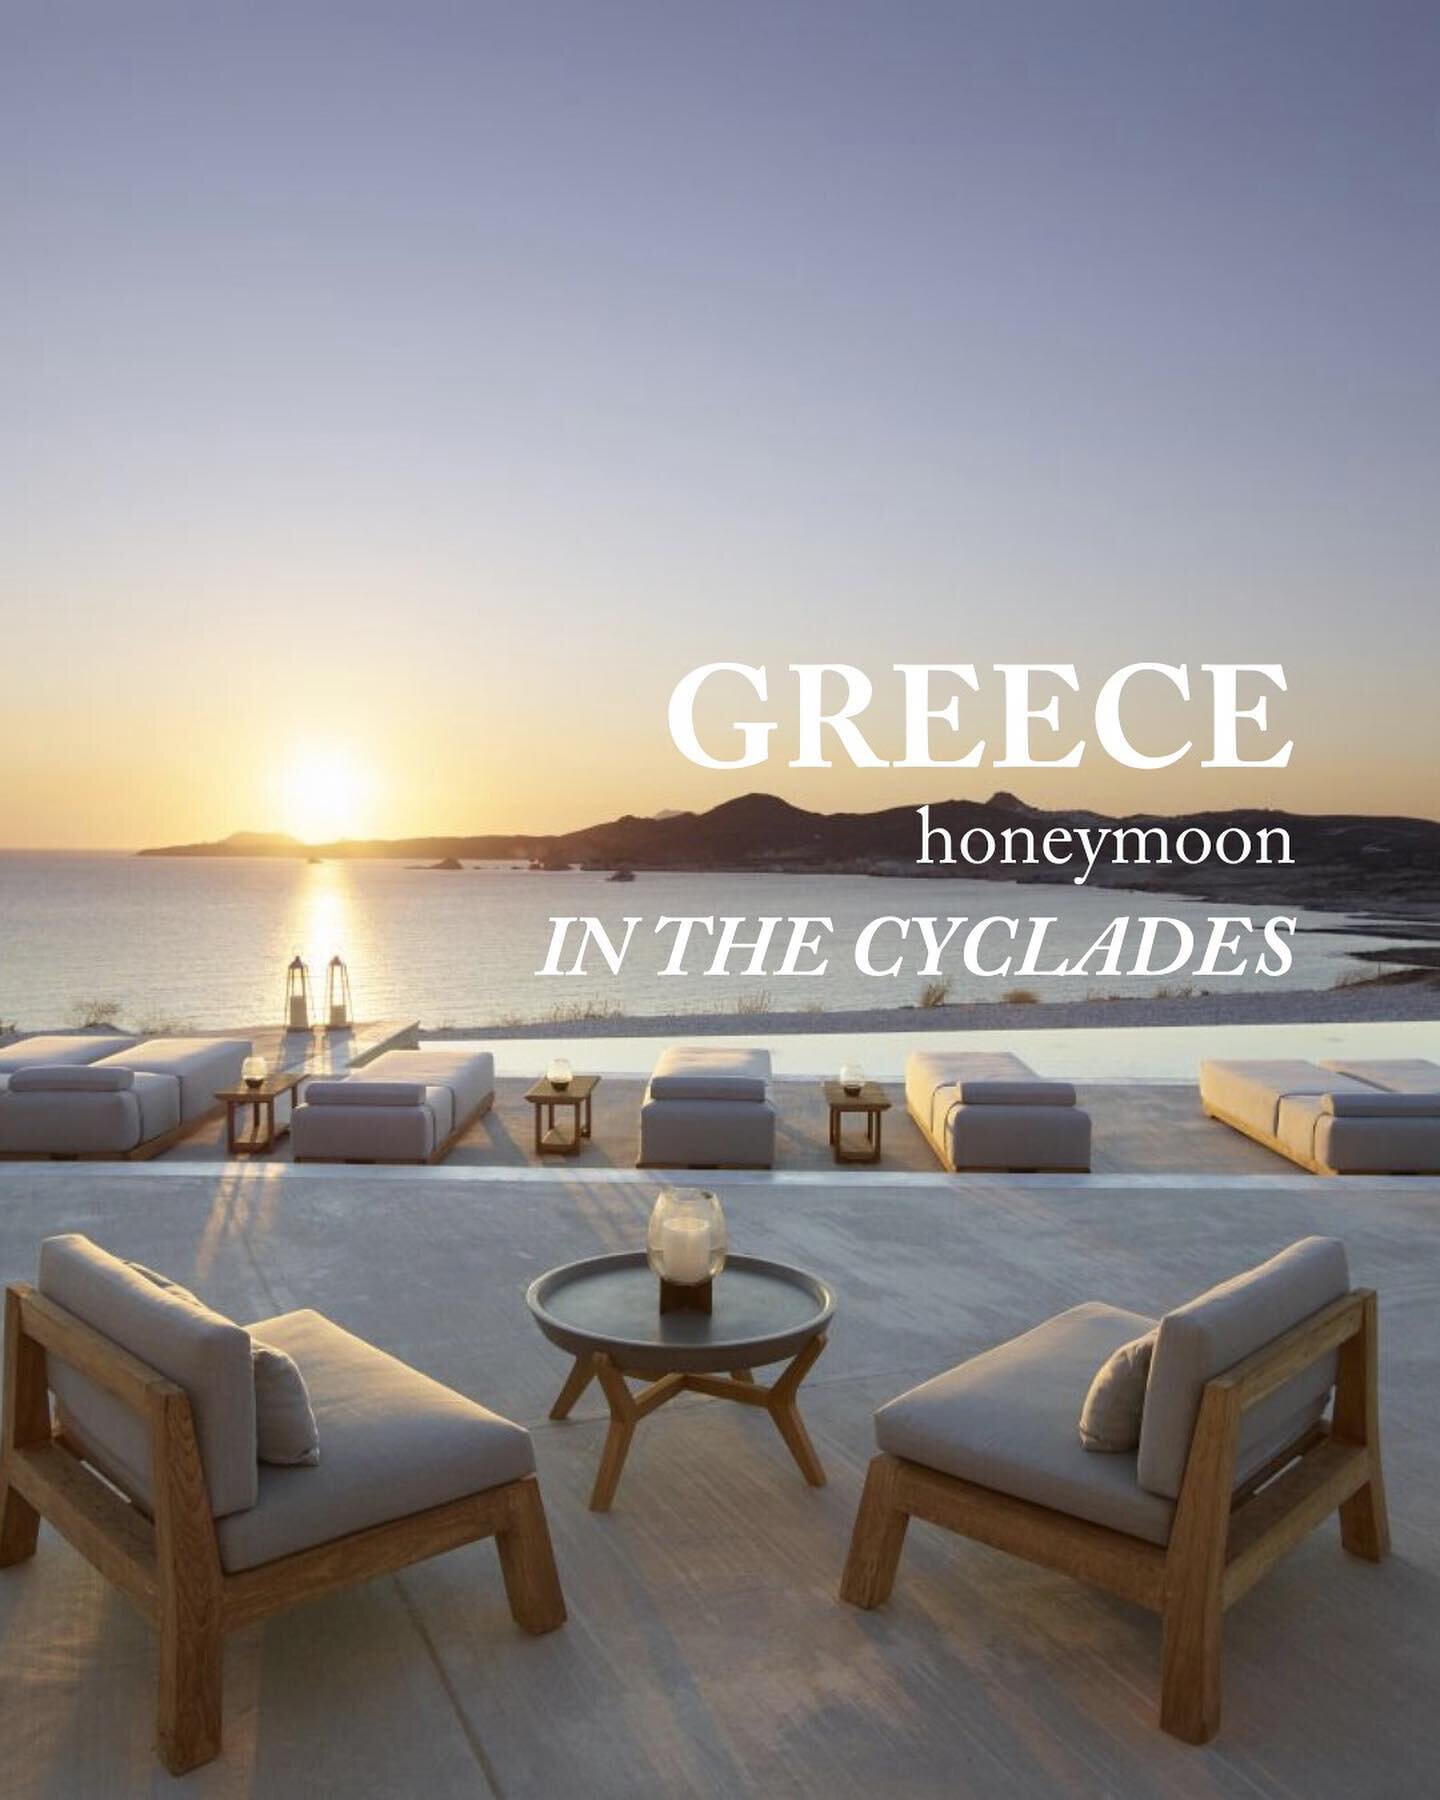 It's a once-in-a-lifetime trip that should be filled with luxury, romance, and unforgettable experiences, and so we always pull out all the stops to ensure we create just that for our clients.

Greek island hopping has been a popular choice for our t